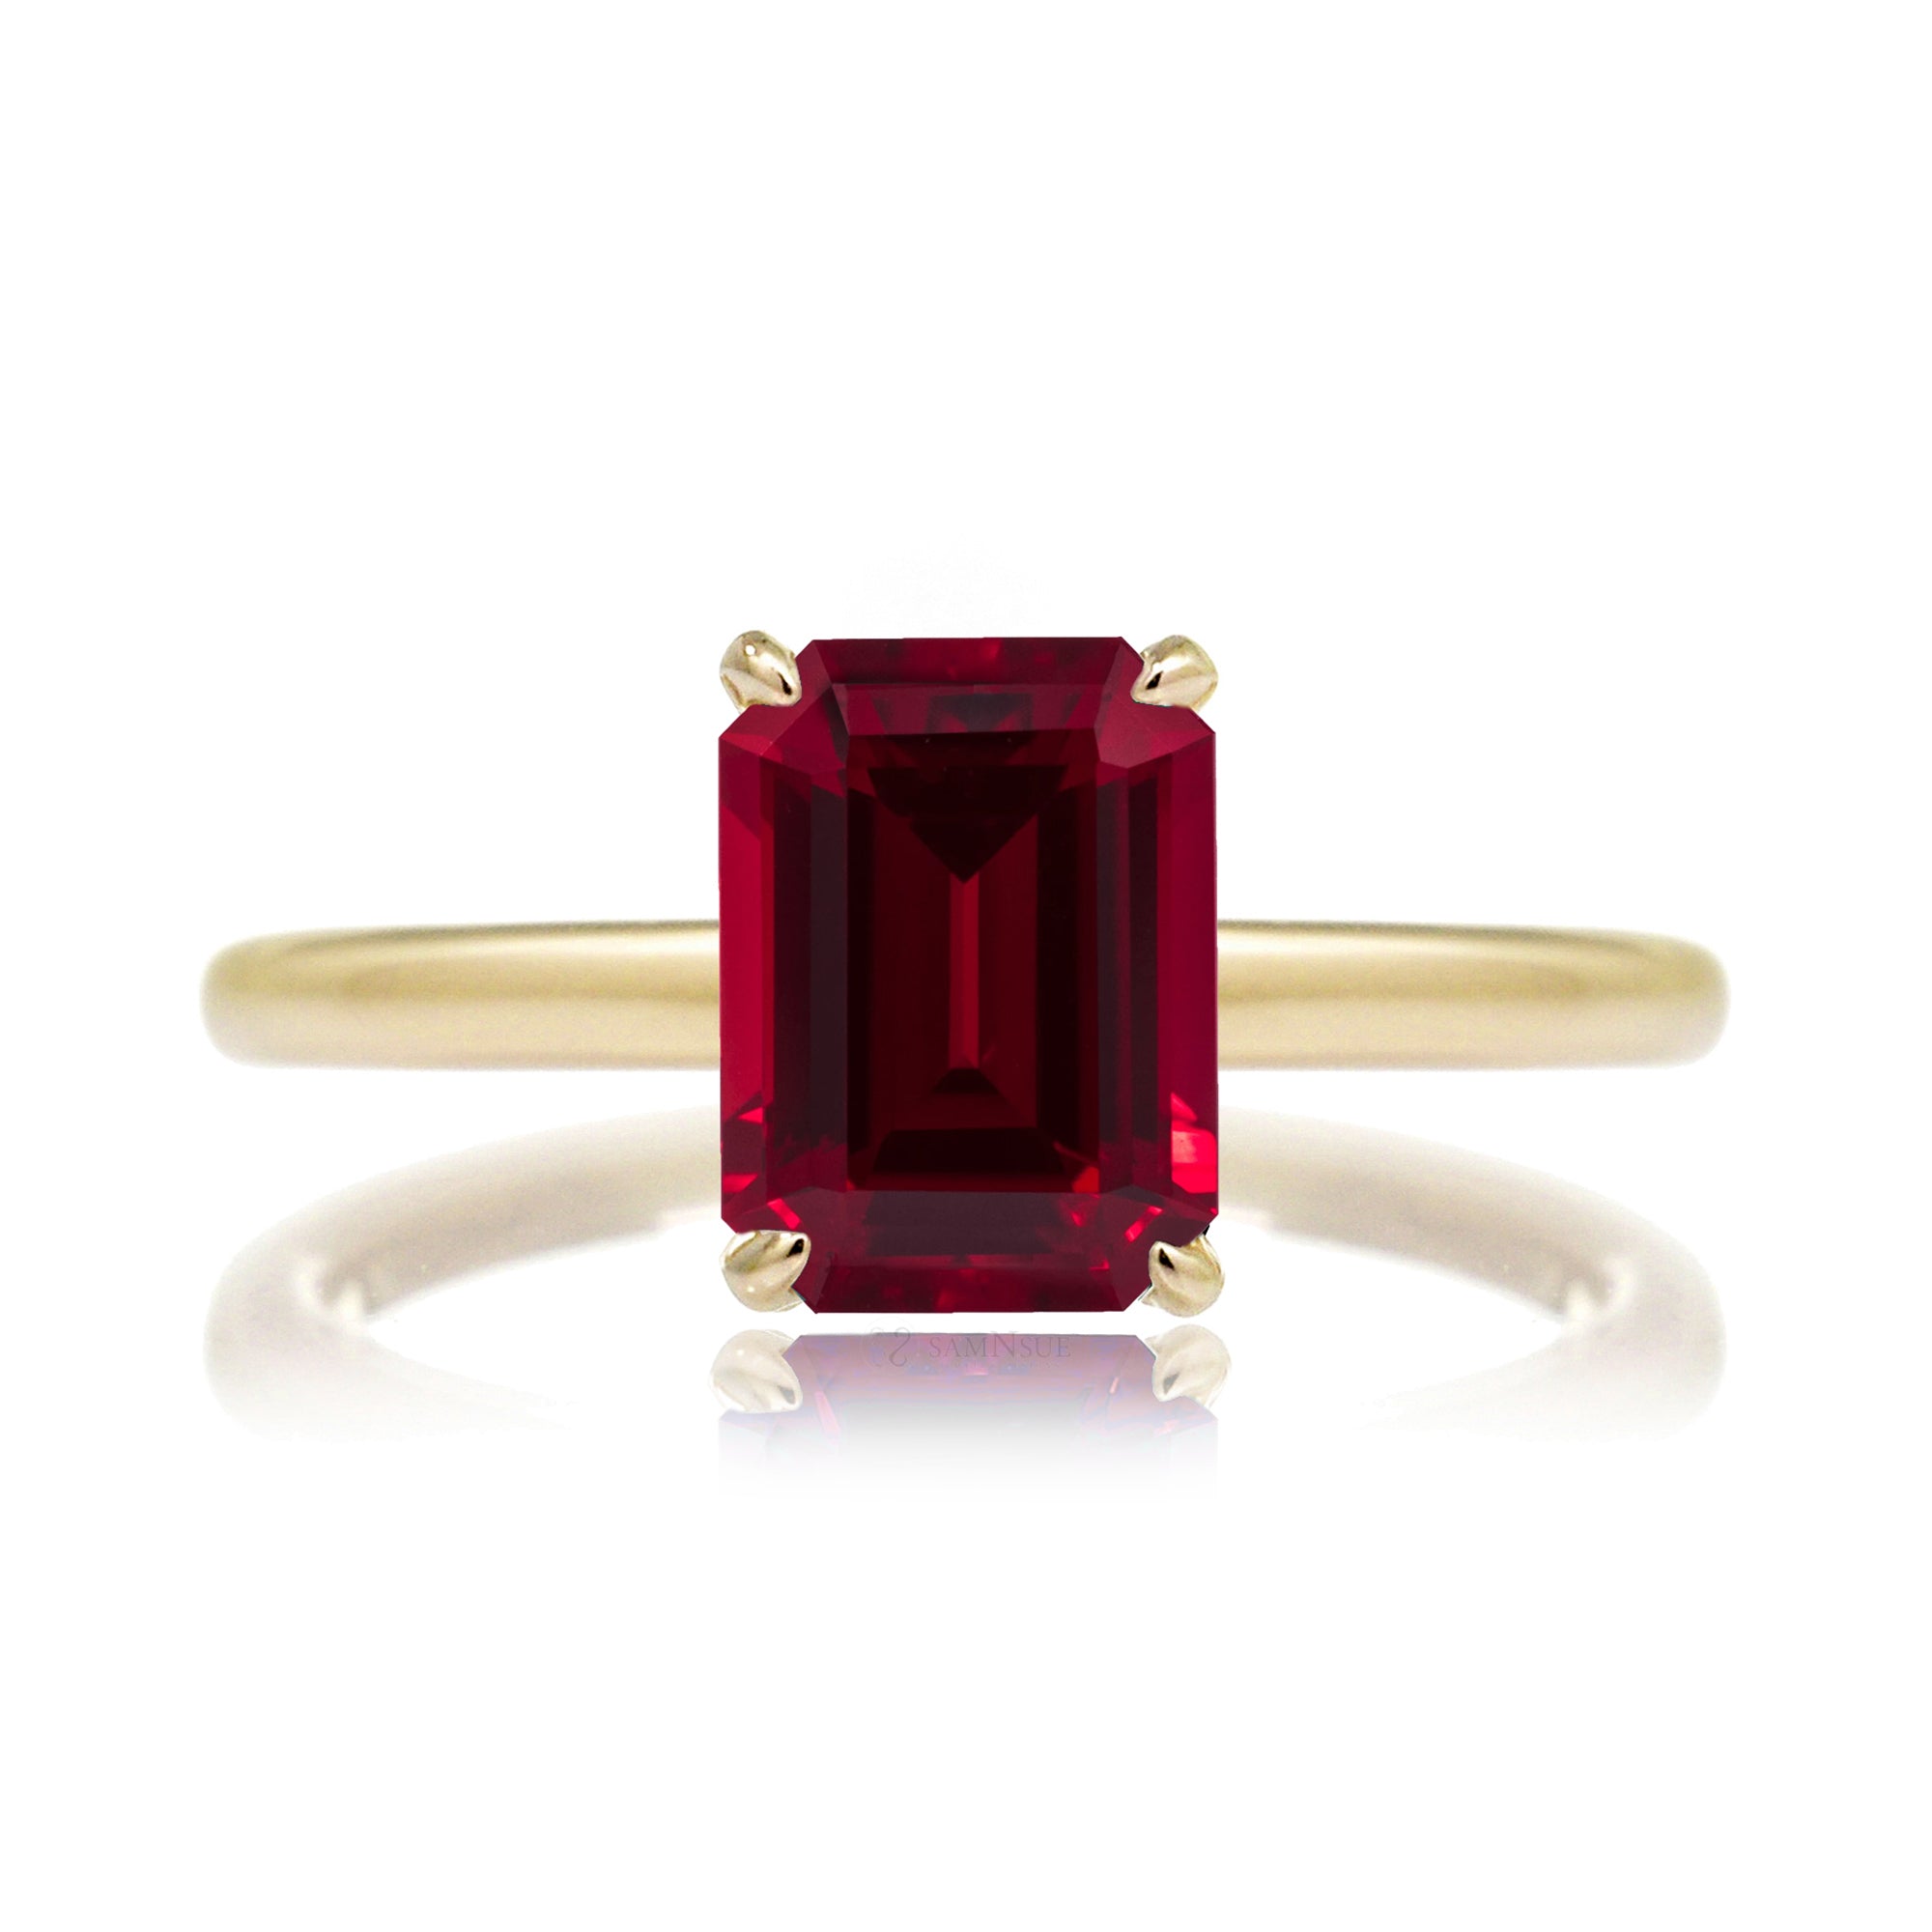 Emerald step cut ruby diamond hidden halo engagement ring in yellow gold